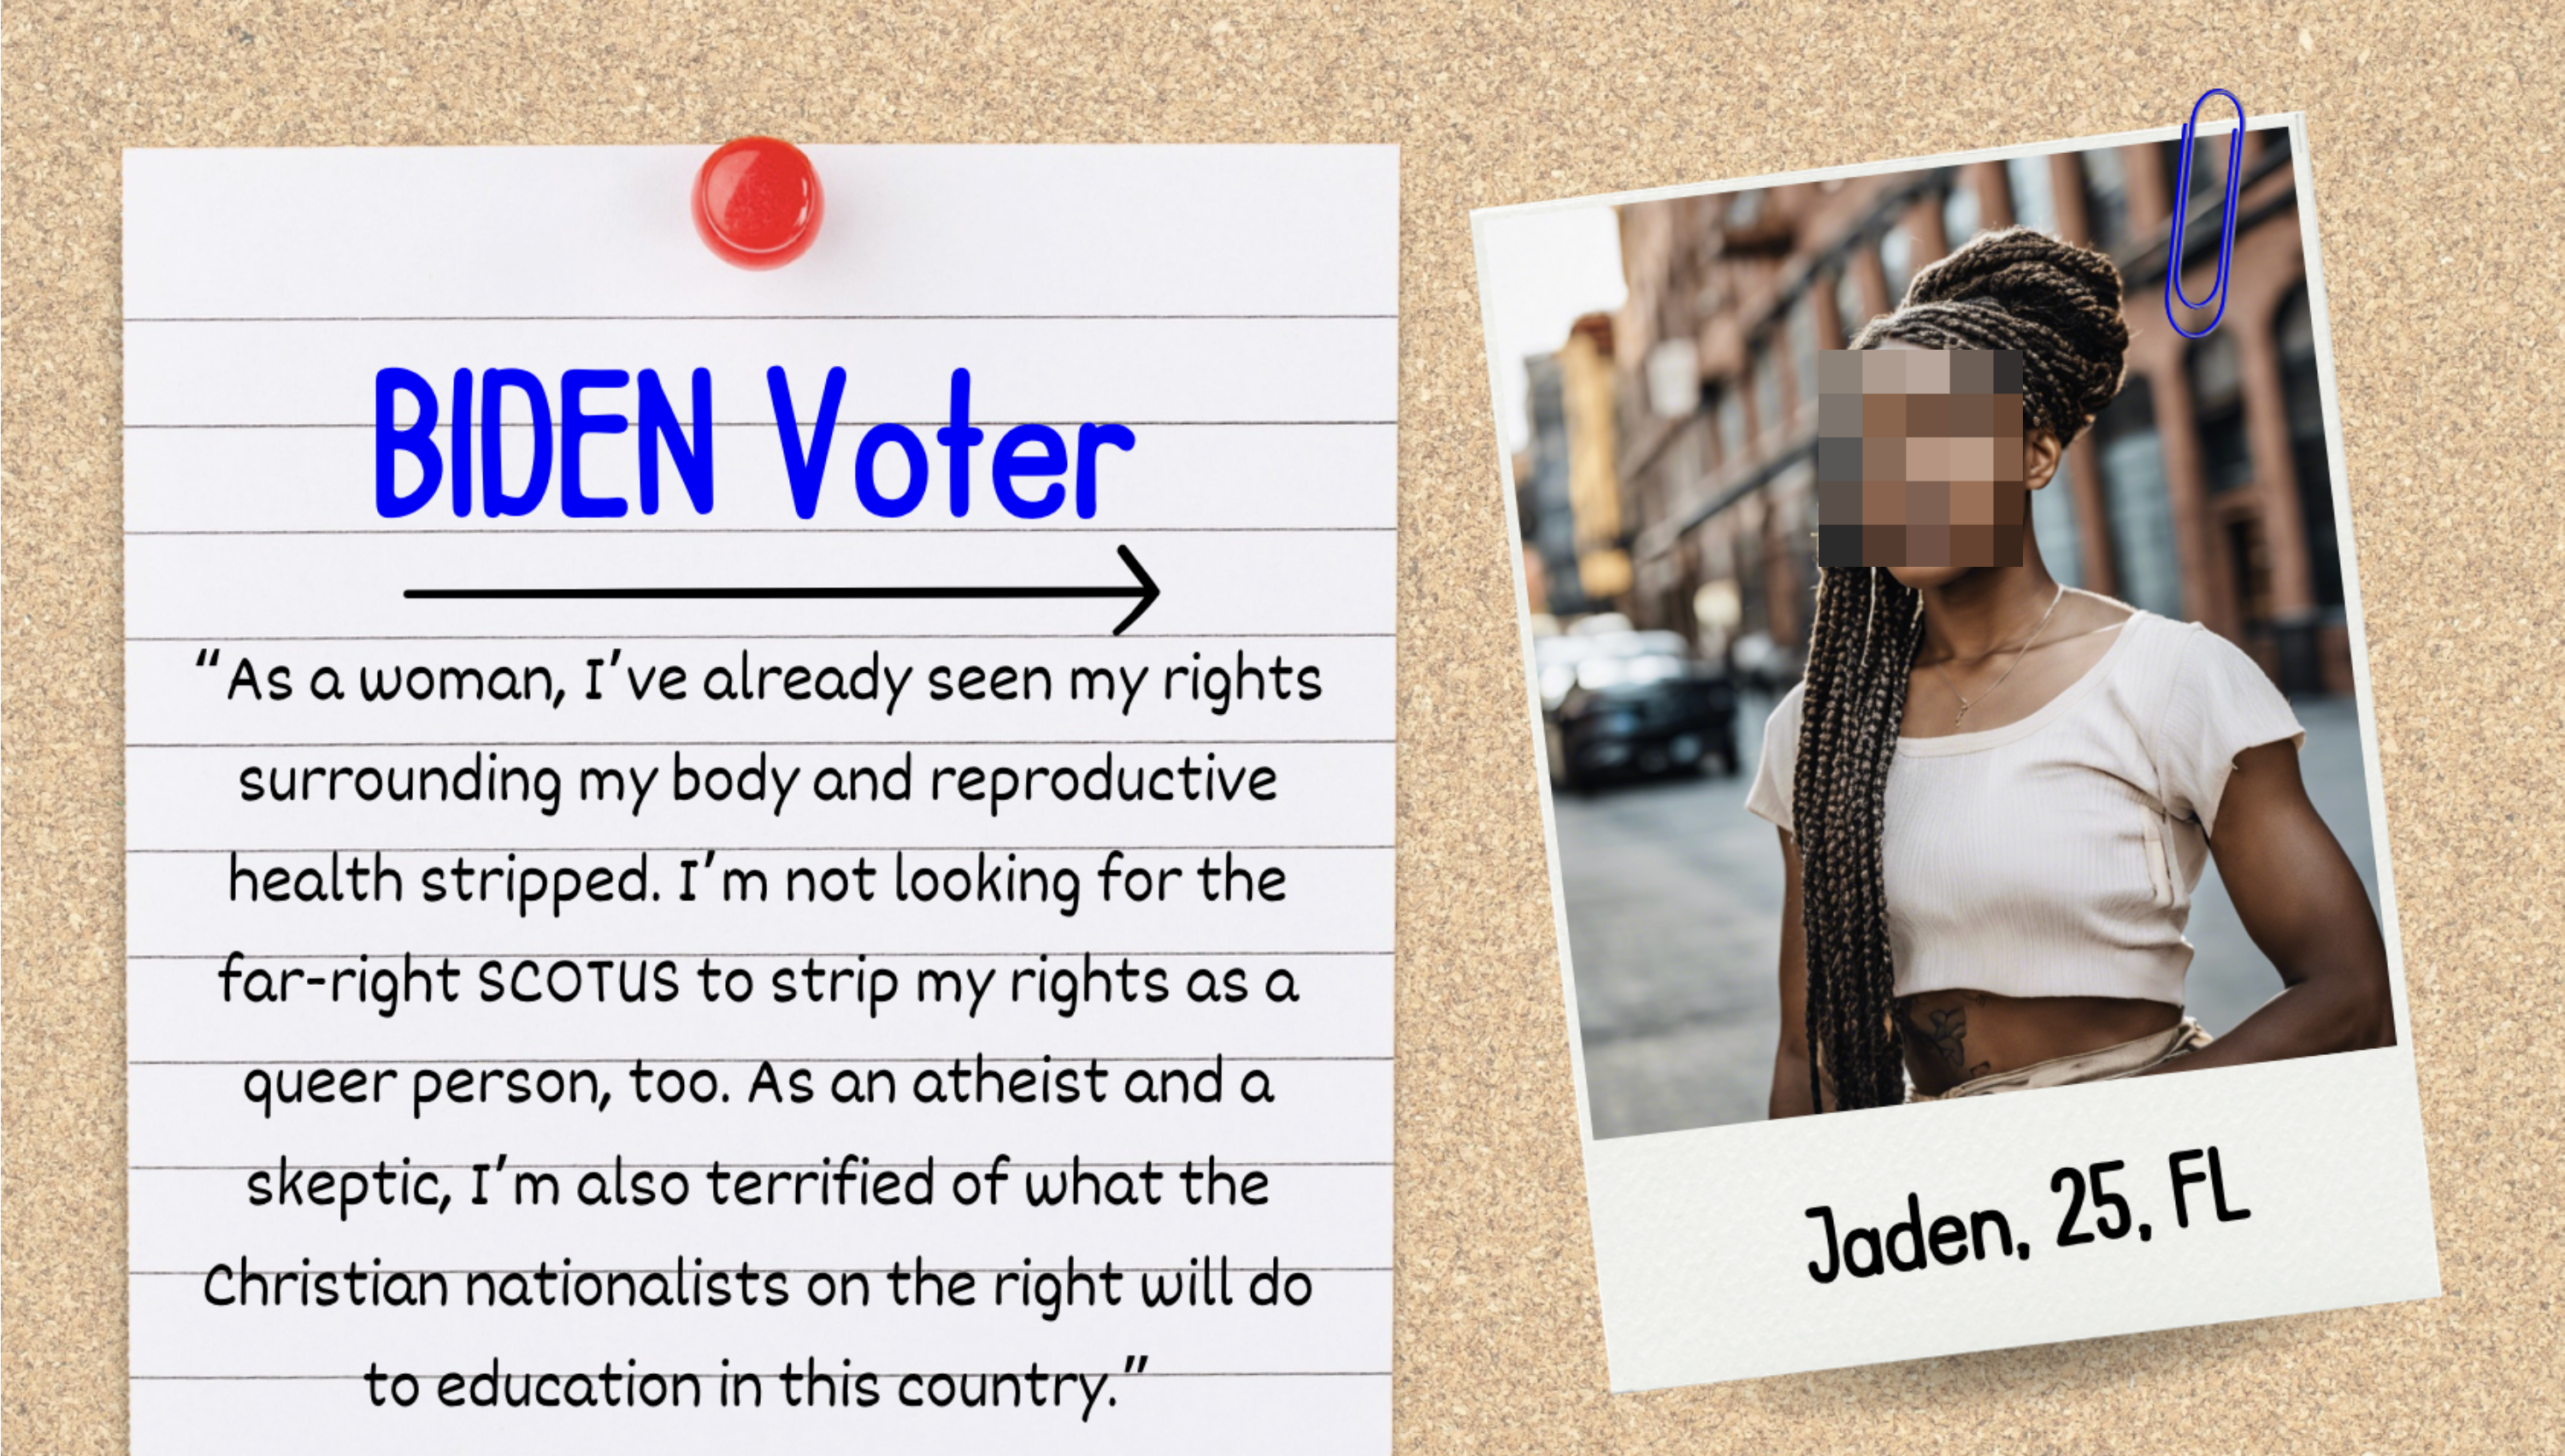 A quote on paper about a 25-year-old woman from Florida, Jaden, describing her concerns about rights as a woman and an atheist, and fear of Christian nationalists